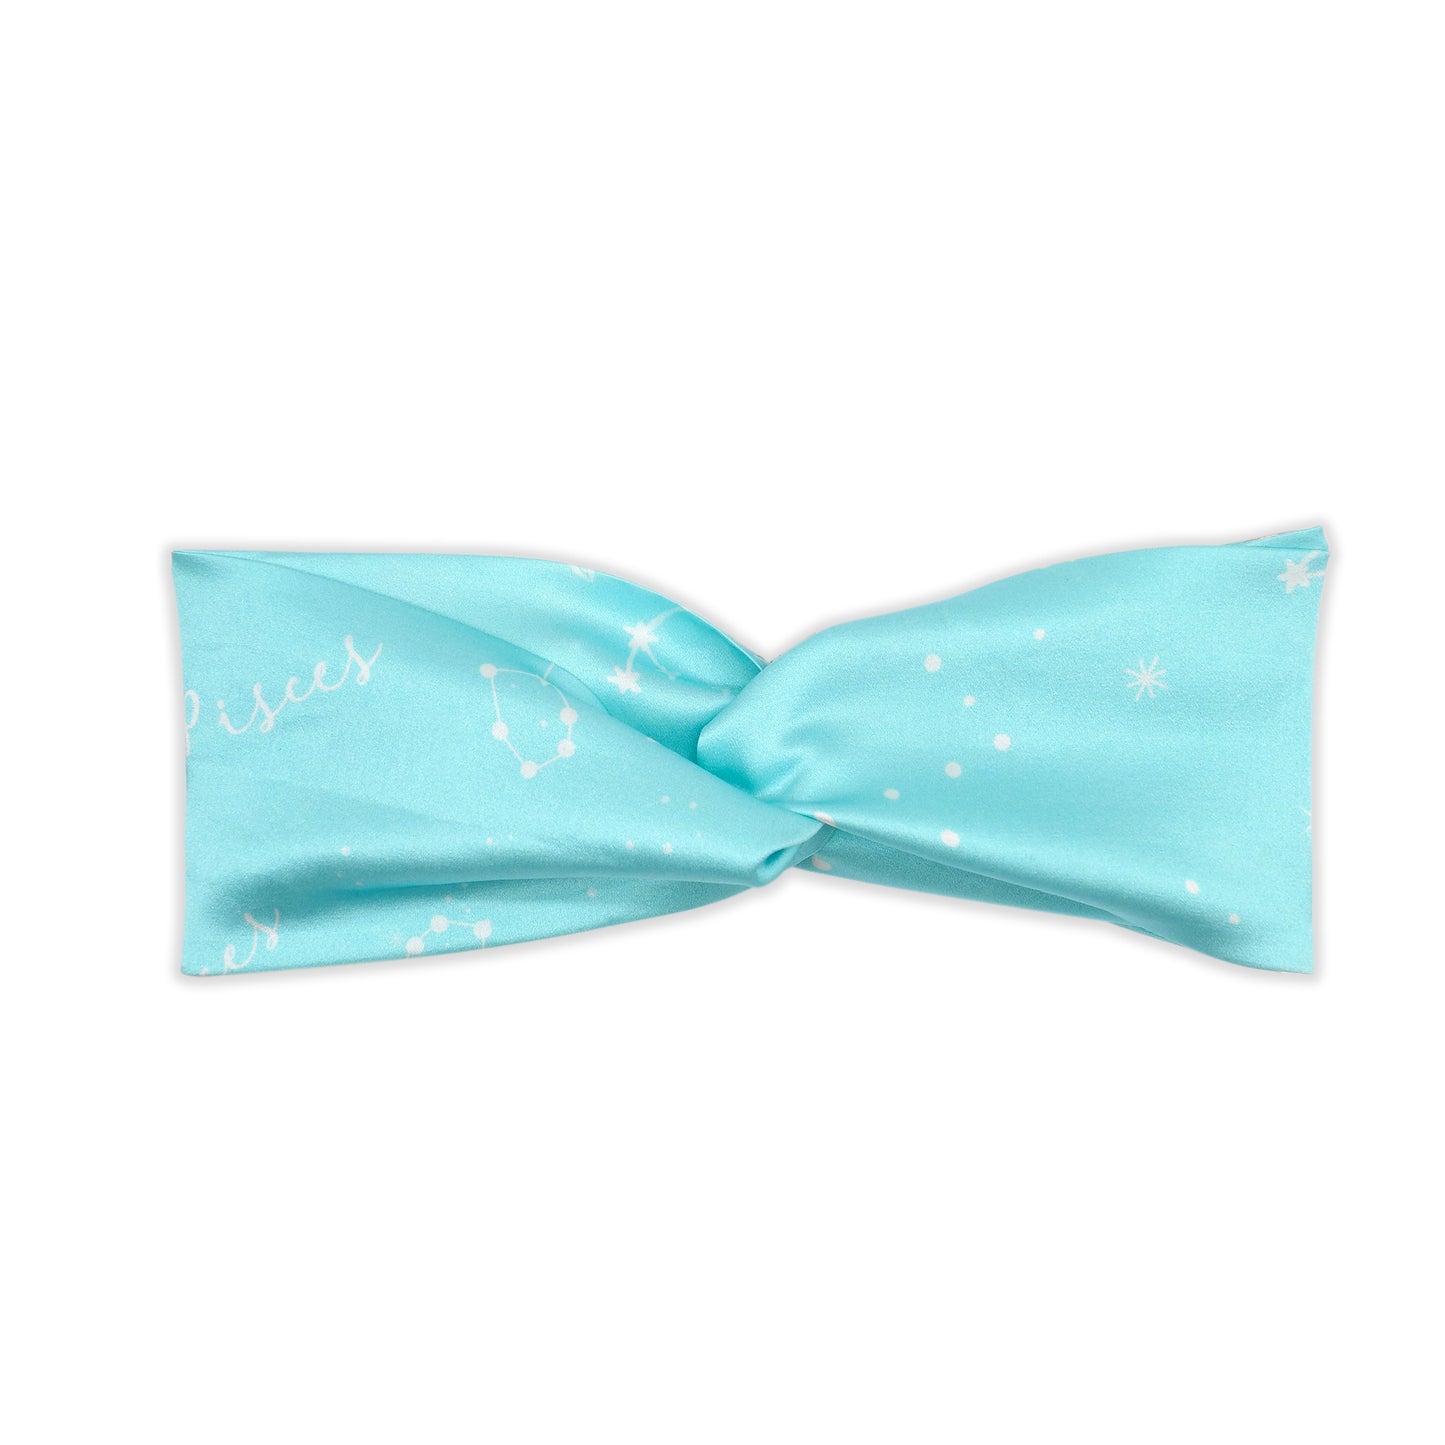 Knotted Passionate Pisces print silk headband